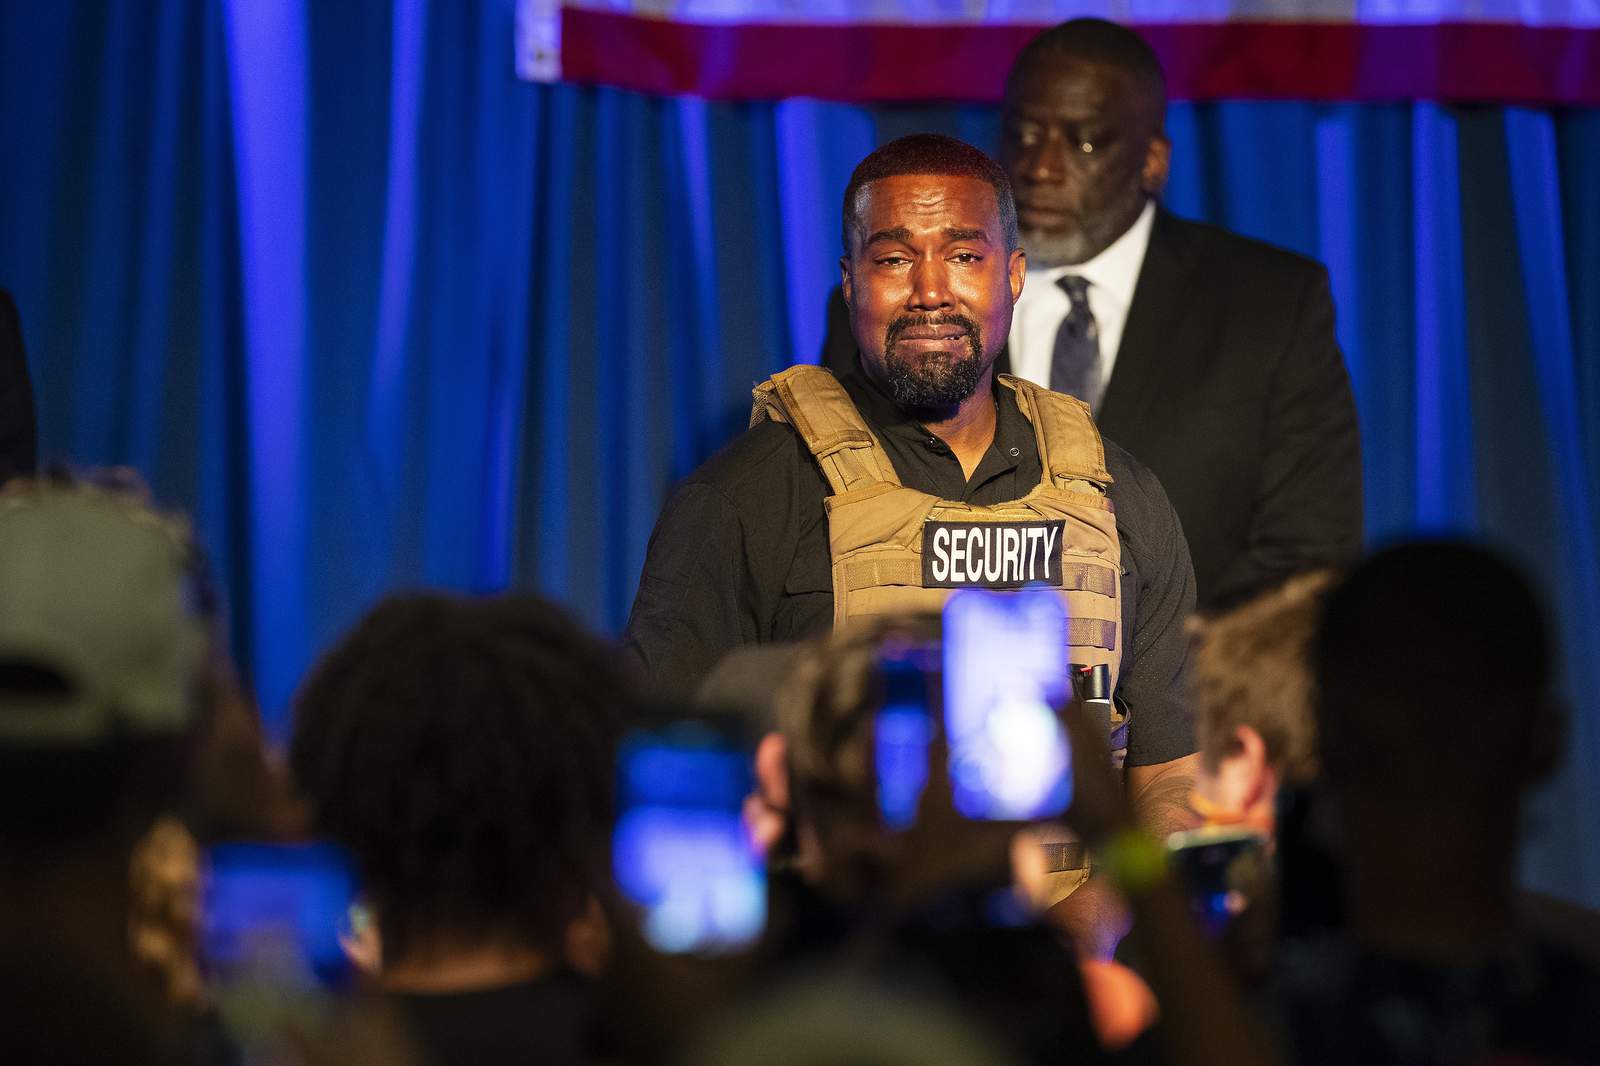 Kanye West criticizes Harriet Tubman at his political rally